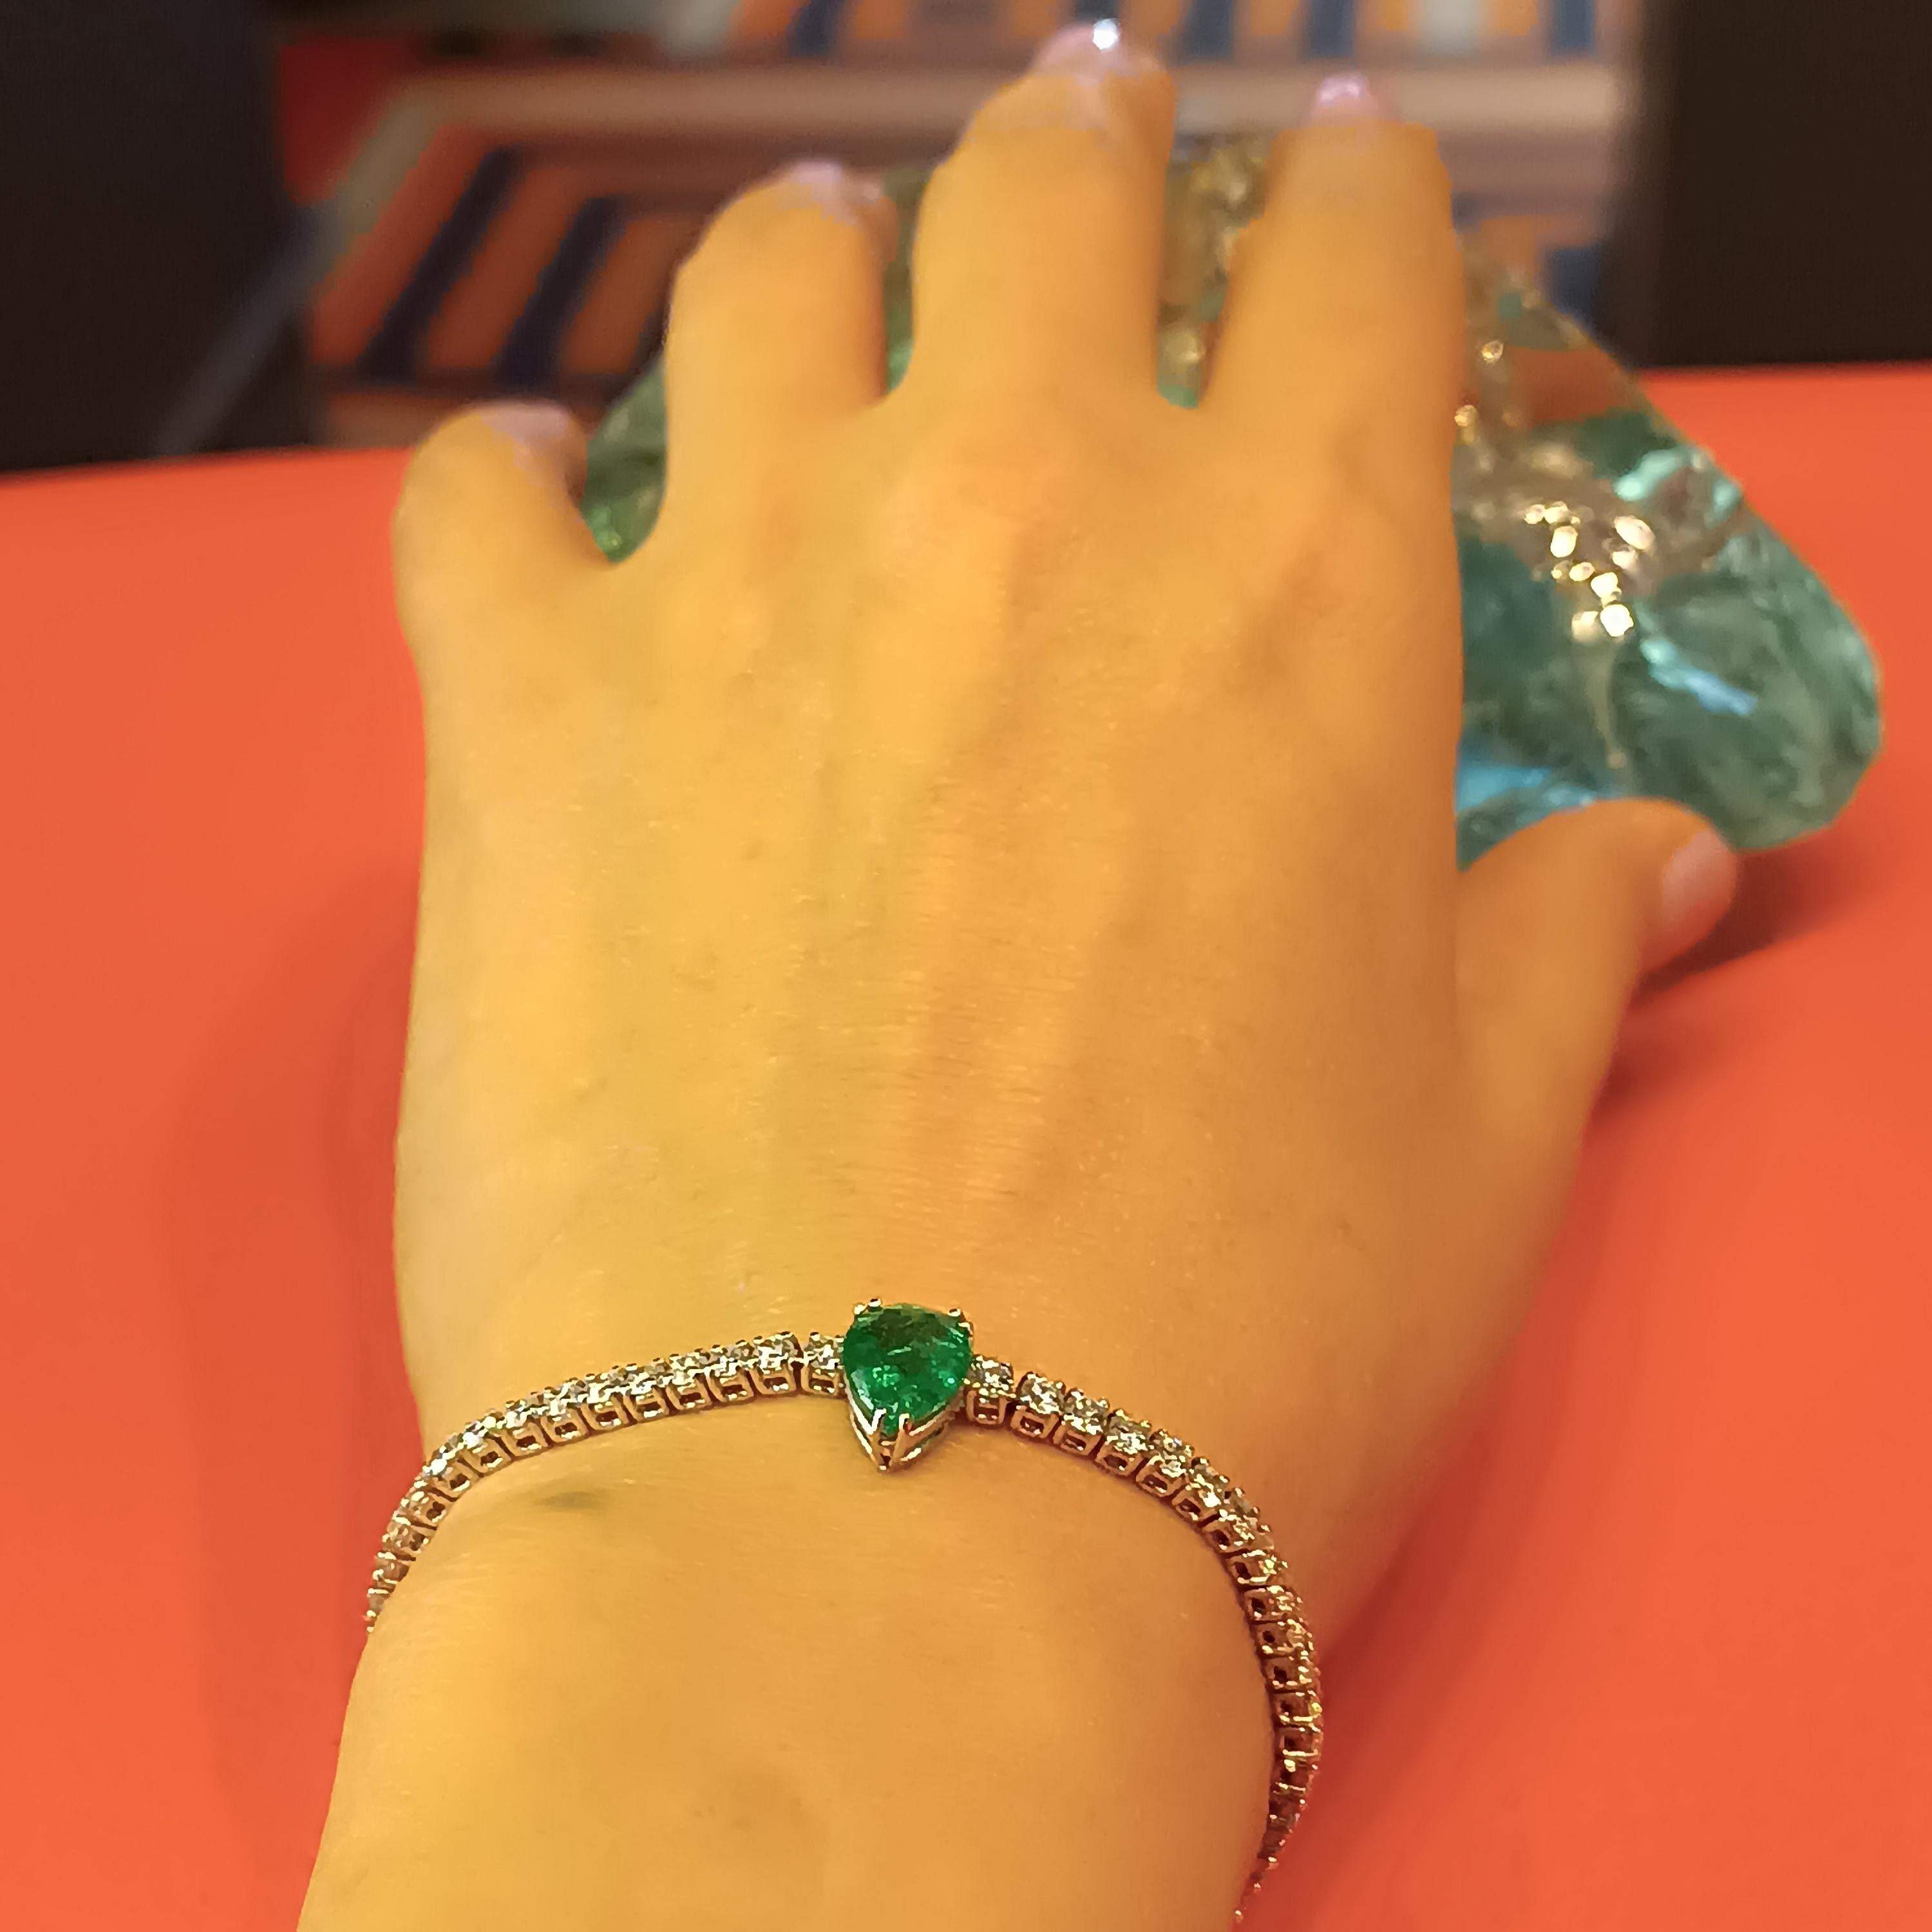 11.87 grams 18 carat white gold tennis bracelet with 4.76 carats for a trotal of 60 stones of VS G color diamonds and a 2.73 carat pear shape colombian emerald the lenght of the bracelet is 17,5 cm.This tennis bracelet is part of our signature